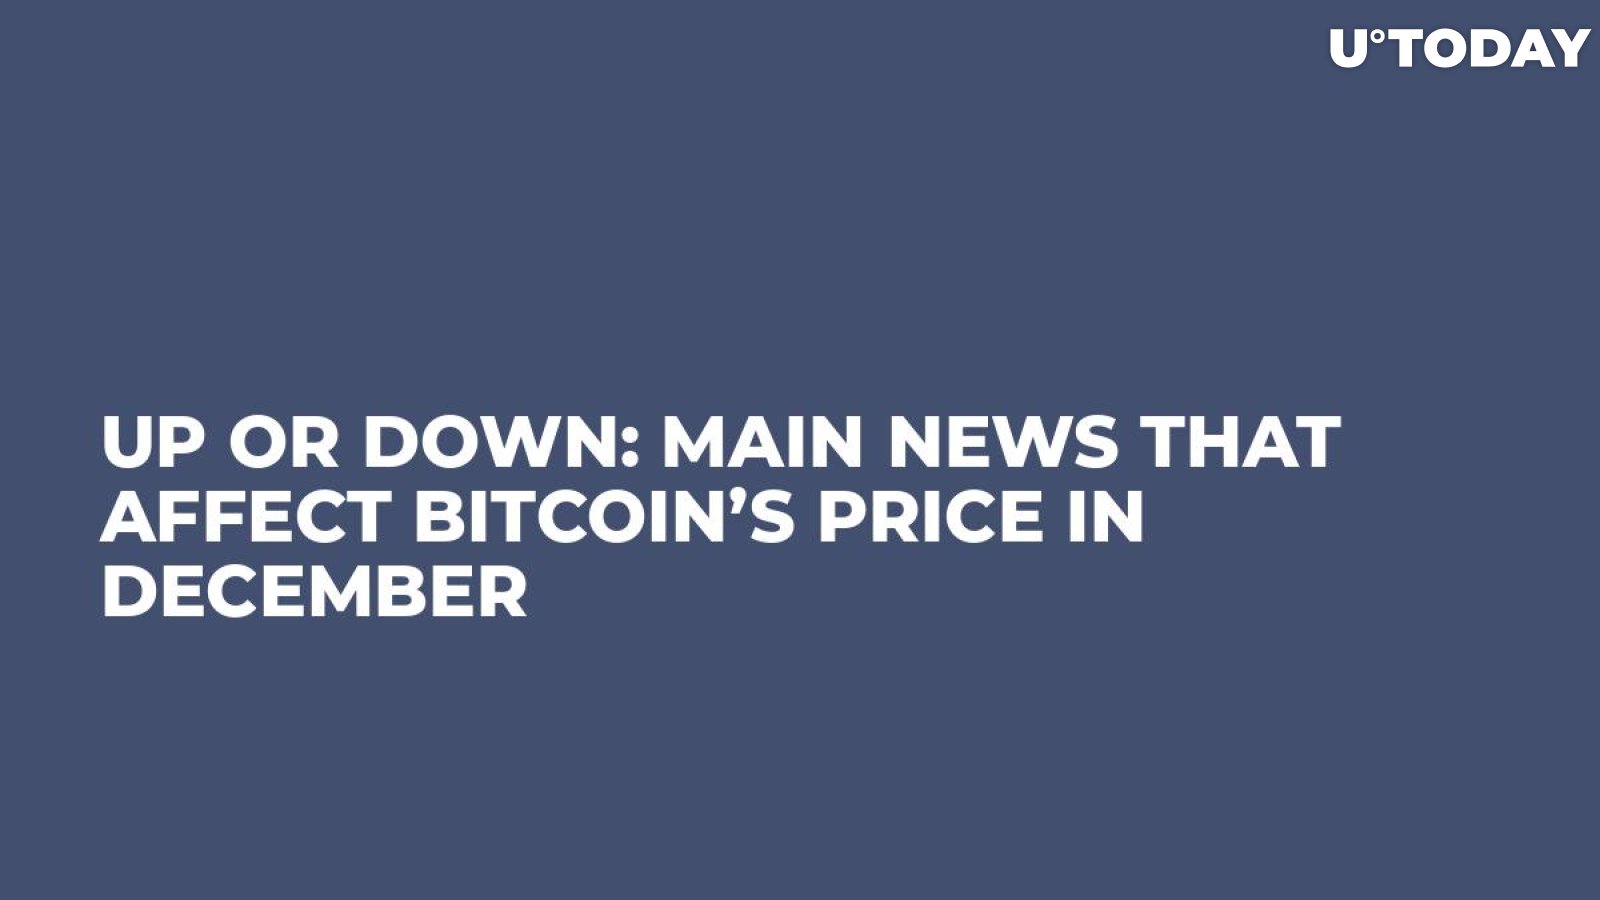 Up or Down: Main News that Affect Bitcoin’s Price in December